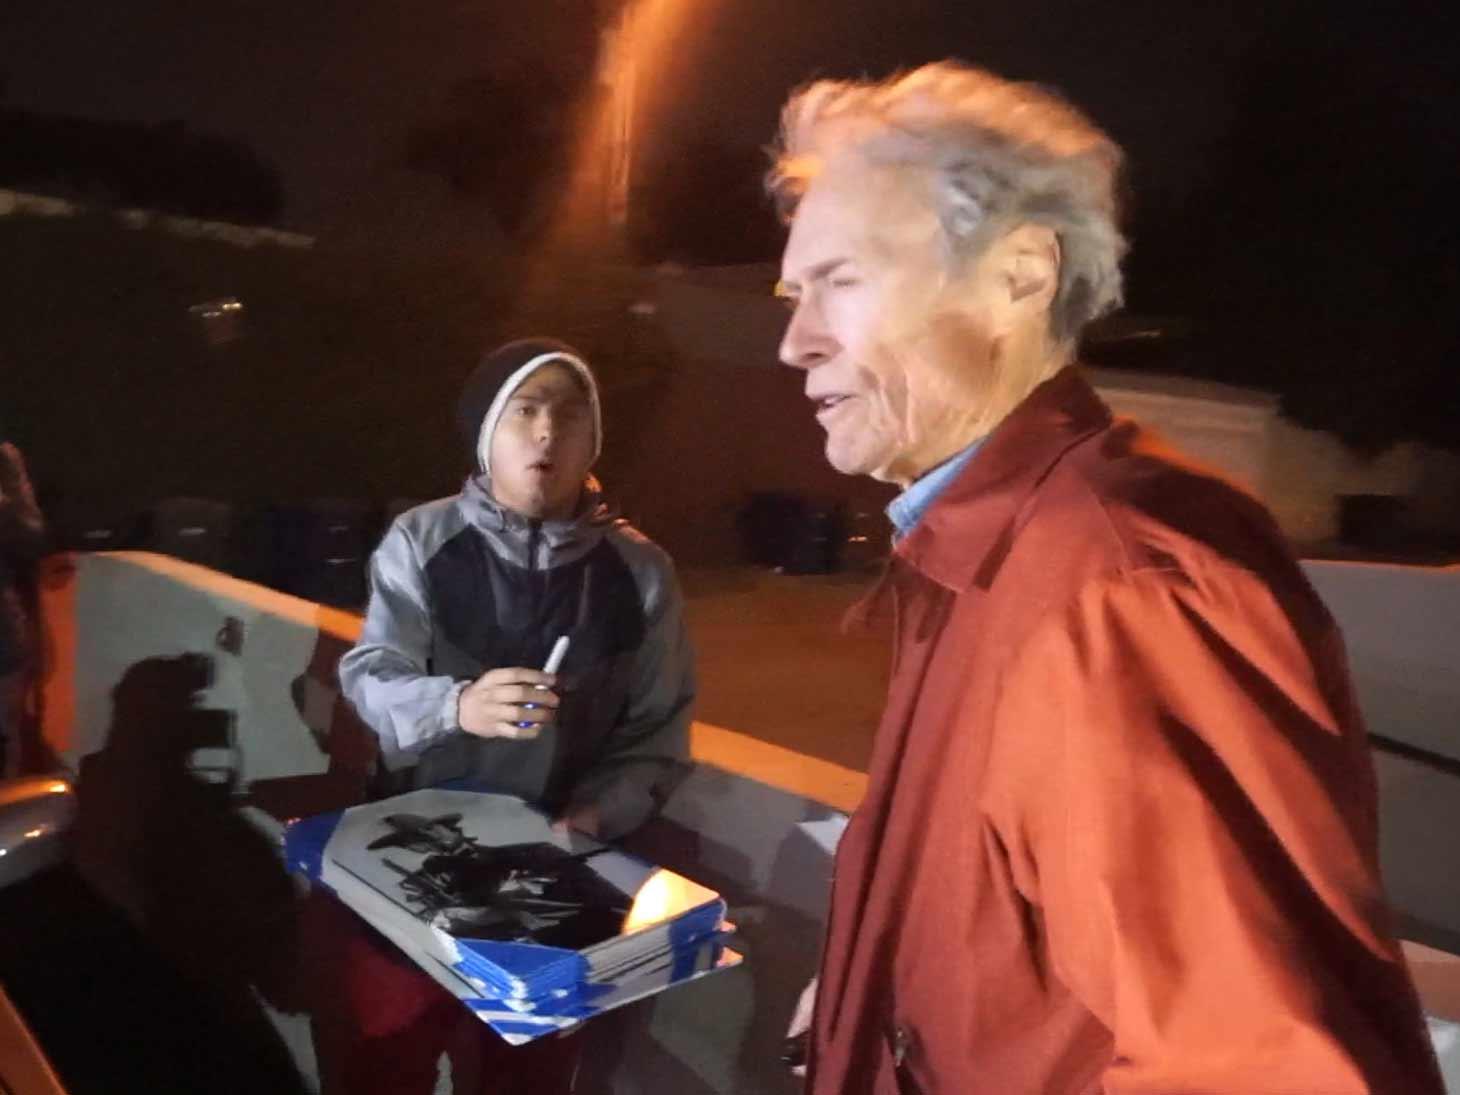 Clint Eastwood Just Wants to Go Home After Dinner